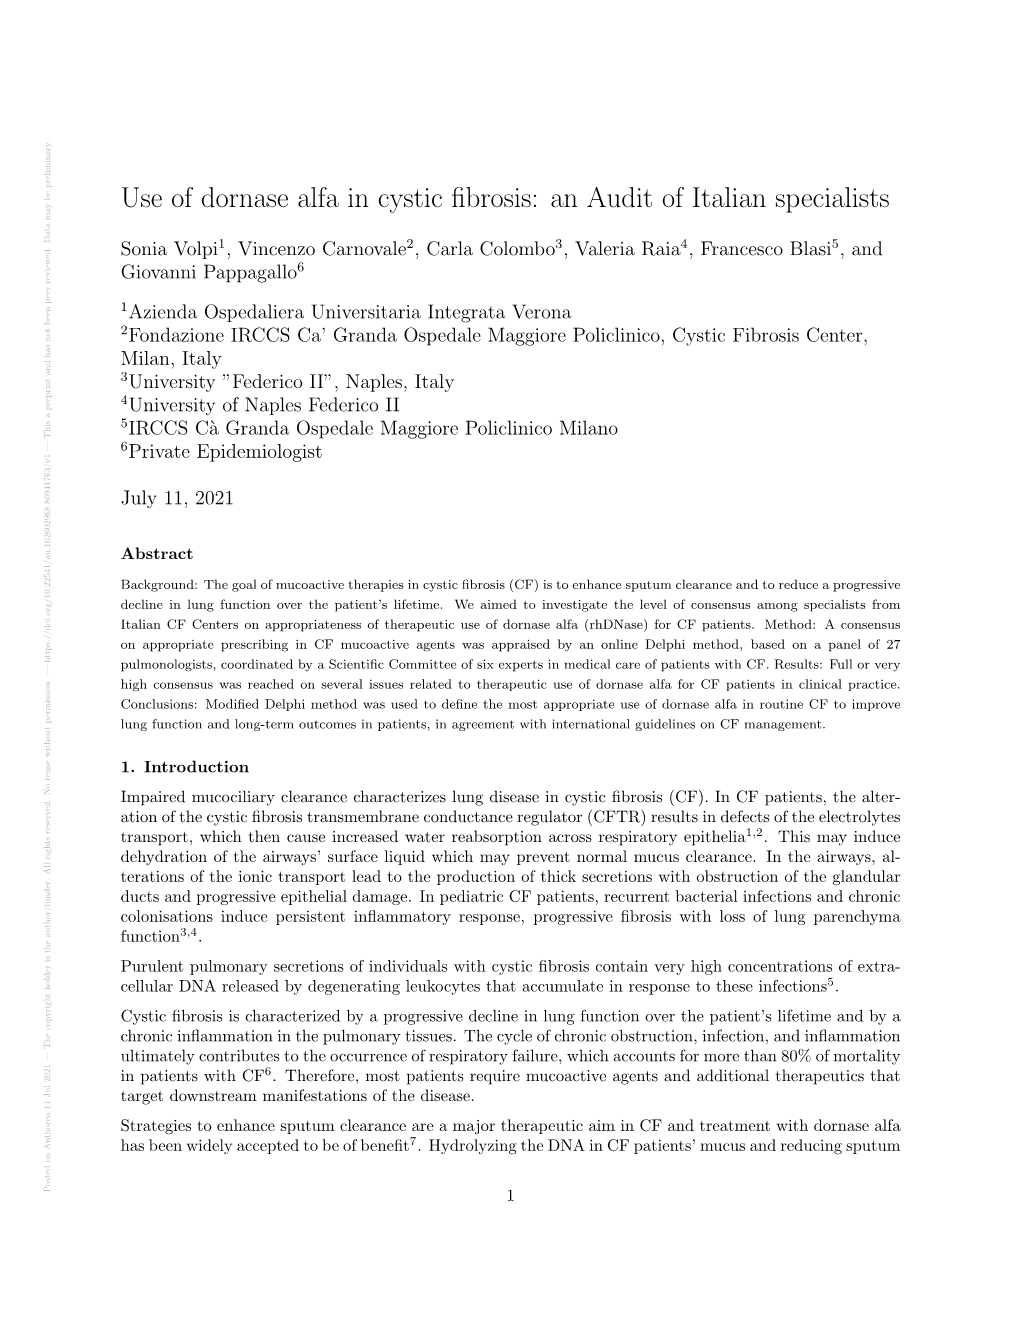 Use of Dornase Alfa in Cystic Fibrosis: an Audit of Italian Specialists